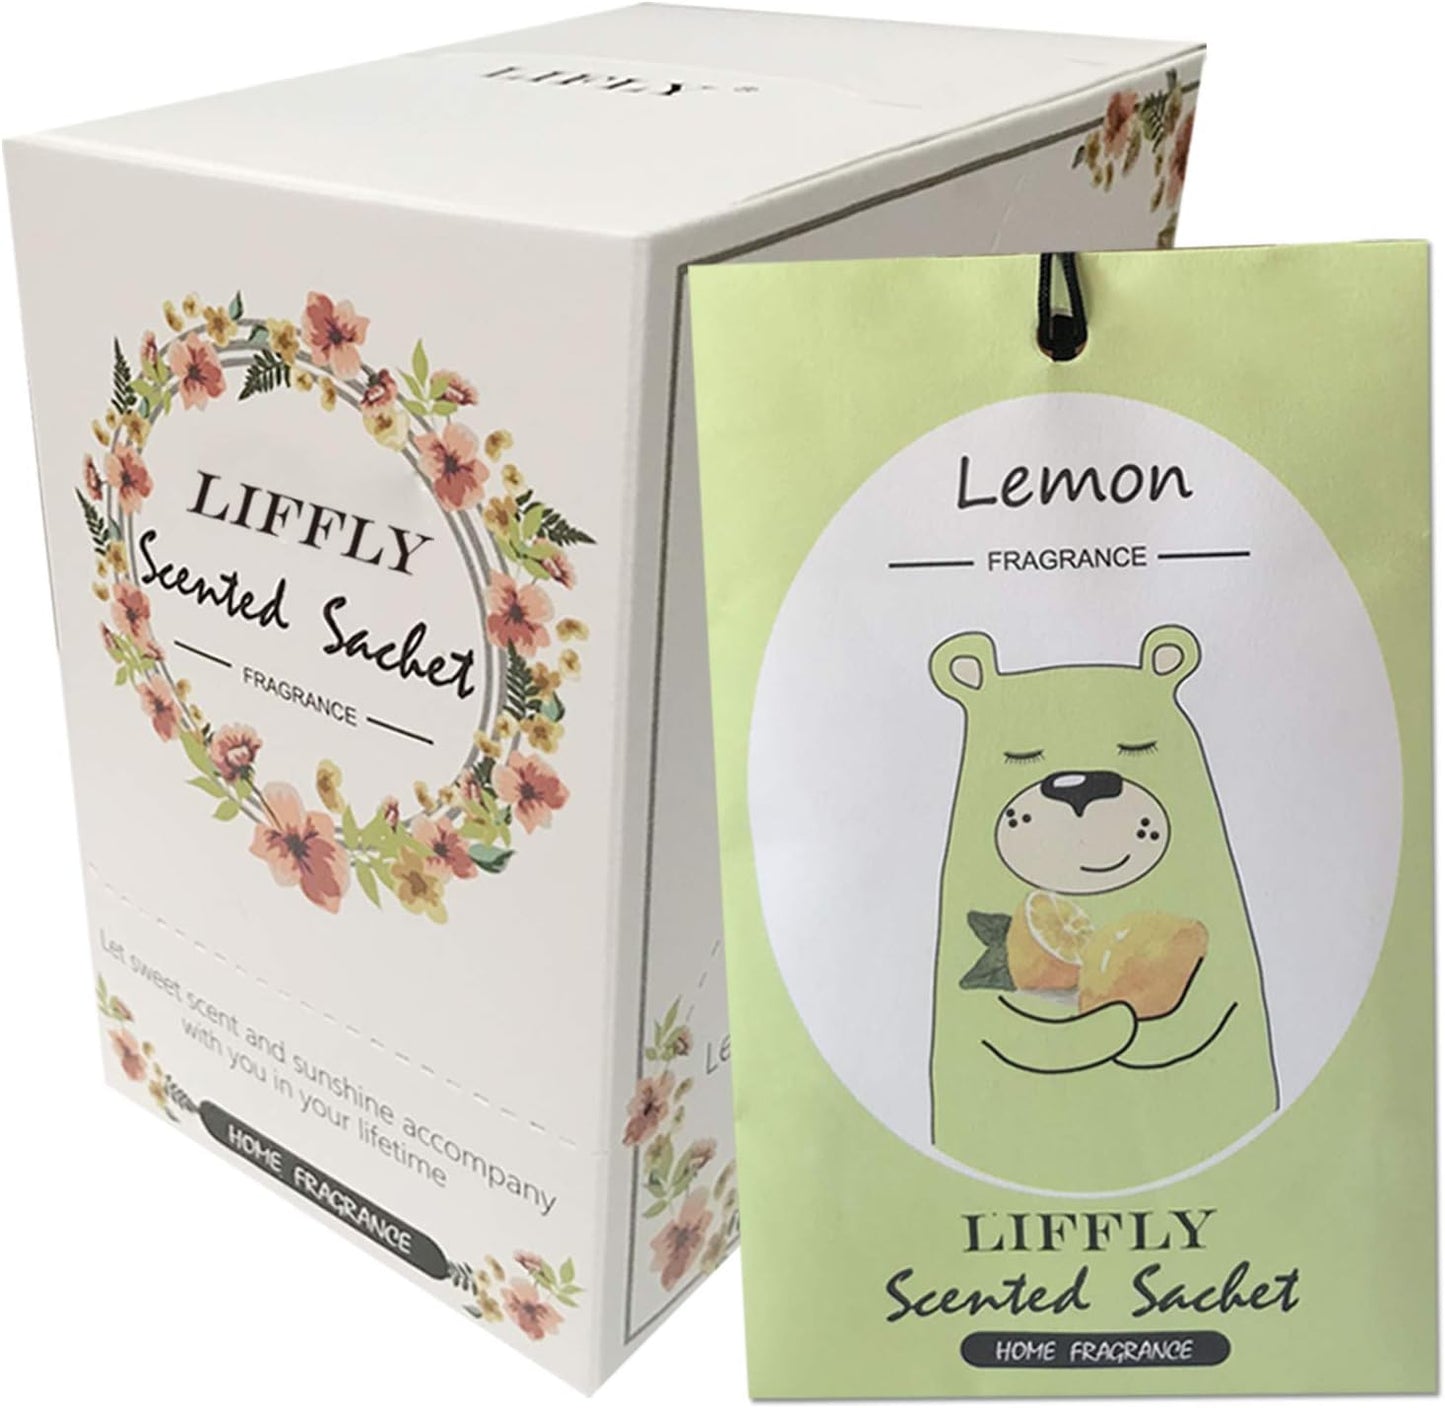 14 Packs Lemon Scented Sachets Bags for Drawer and Closet